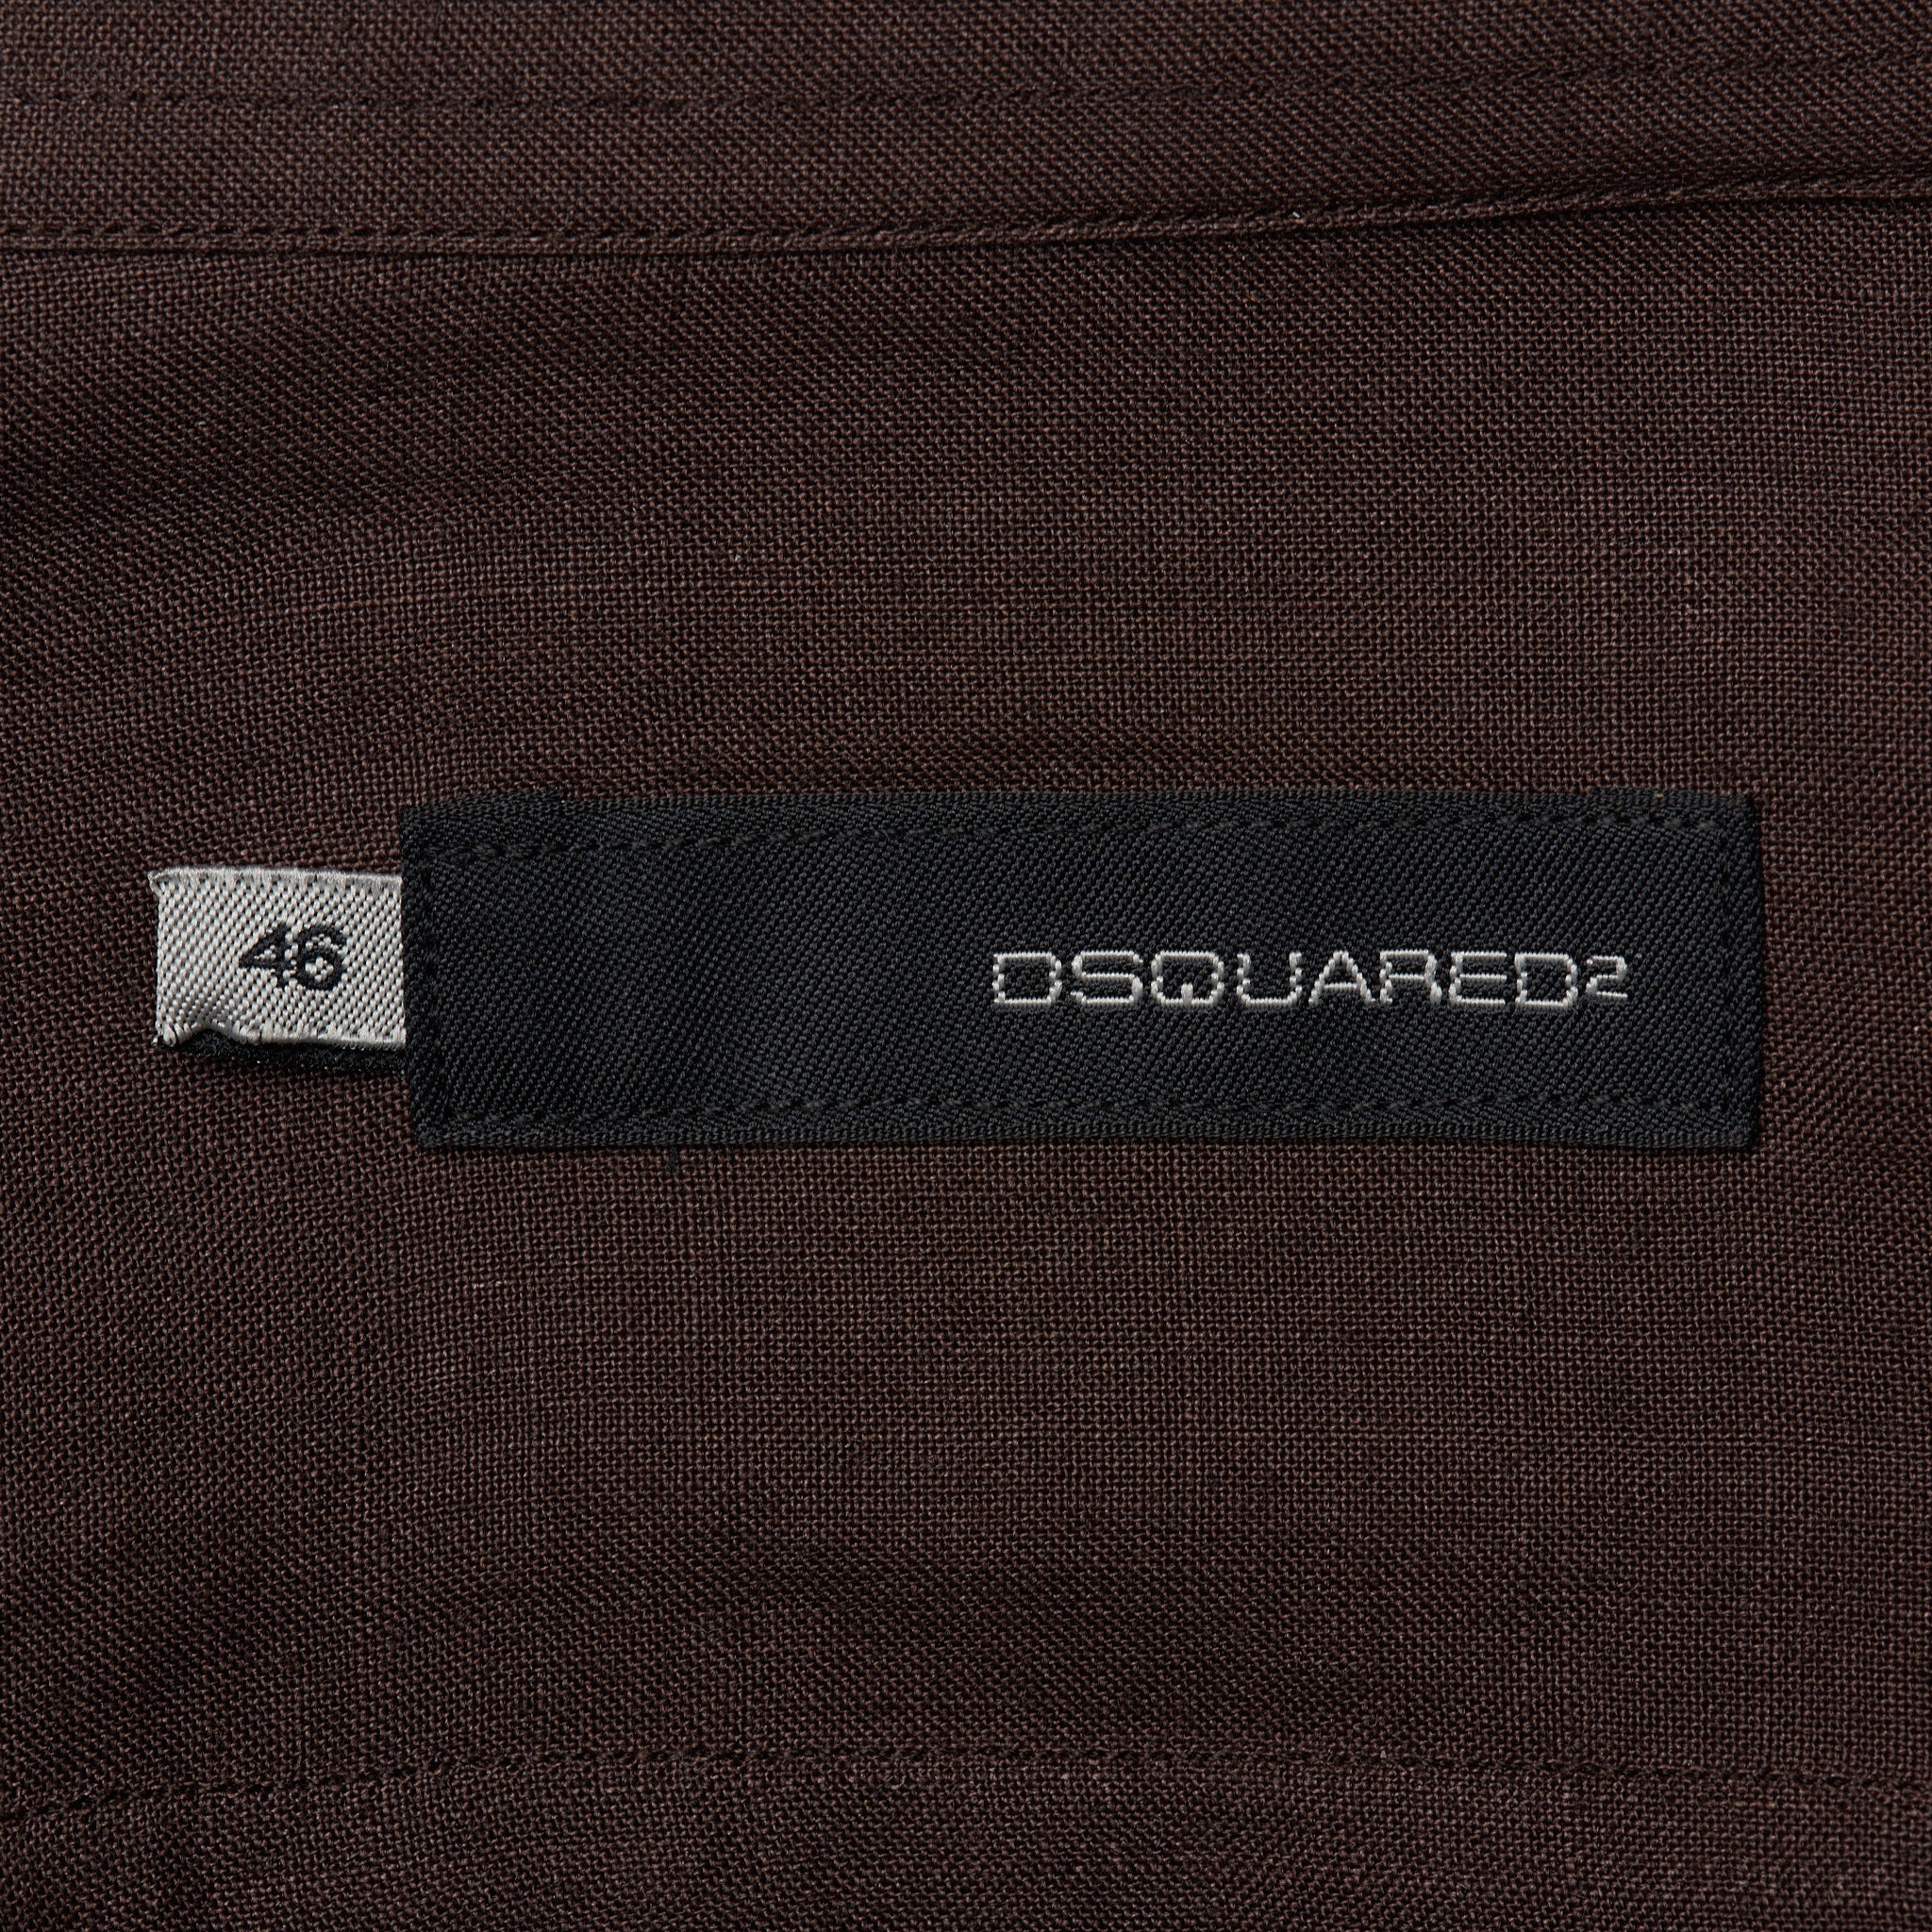 DSQUARED2 Made In Italy Solid Brown Ramie Shirt XS NEW 46 Silm Fit French Cuff